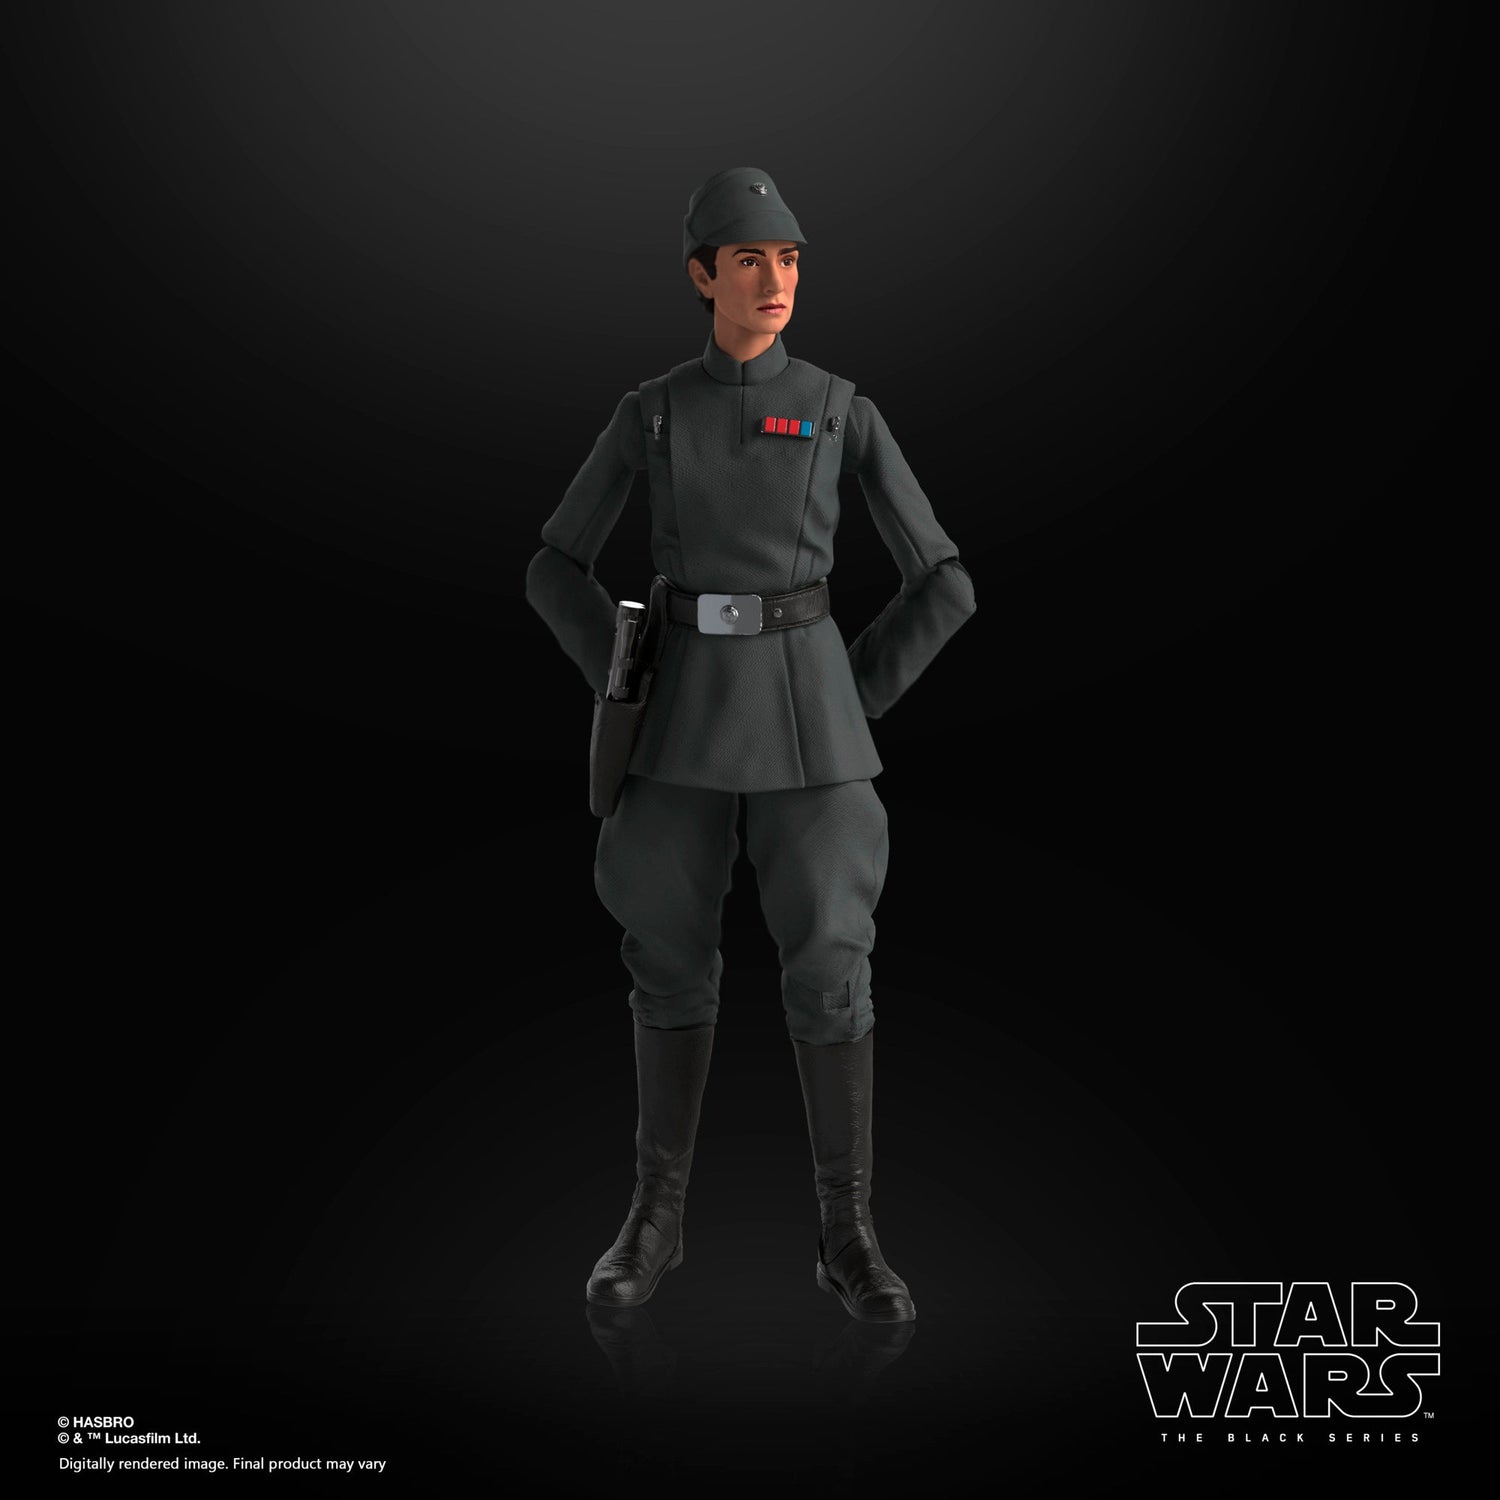 Star Wars: The Black Series Tala (Imperial Officer) Hasbro